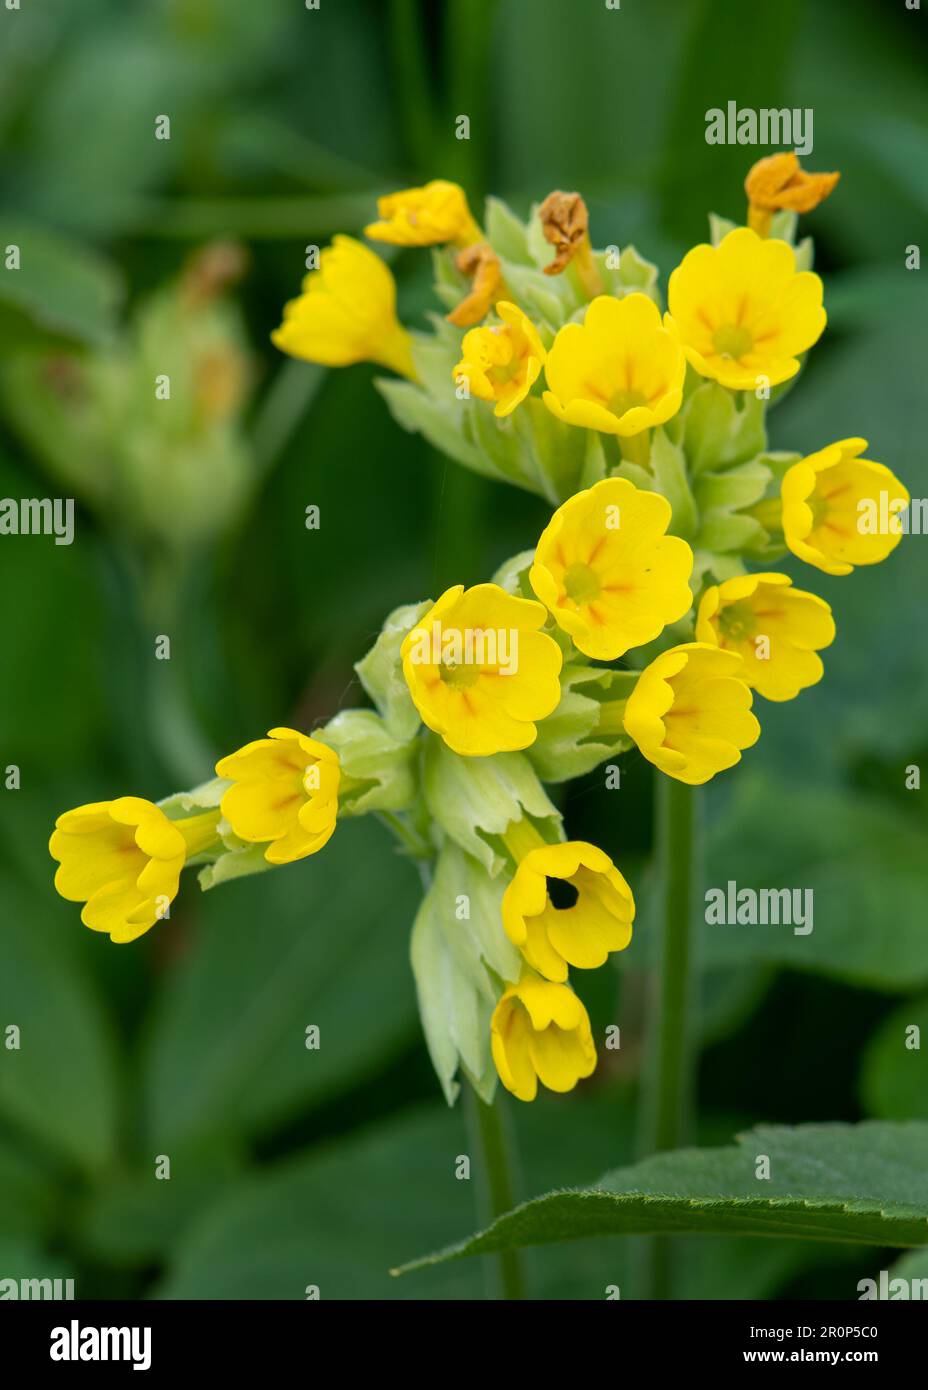 The delicate yellow of the primrose shines amidst springtime, reminding us that beauty is often found in the simplest things Stock Photo